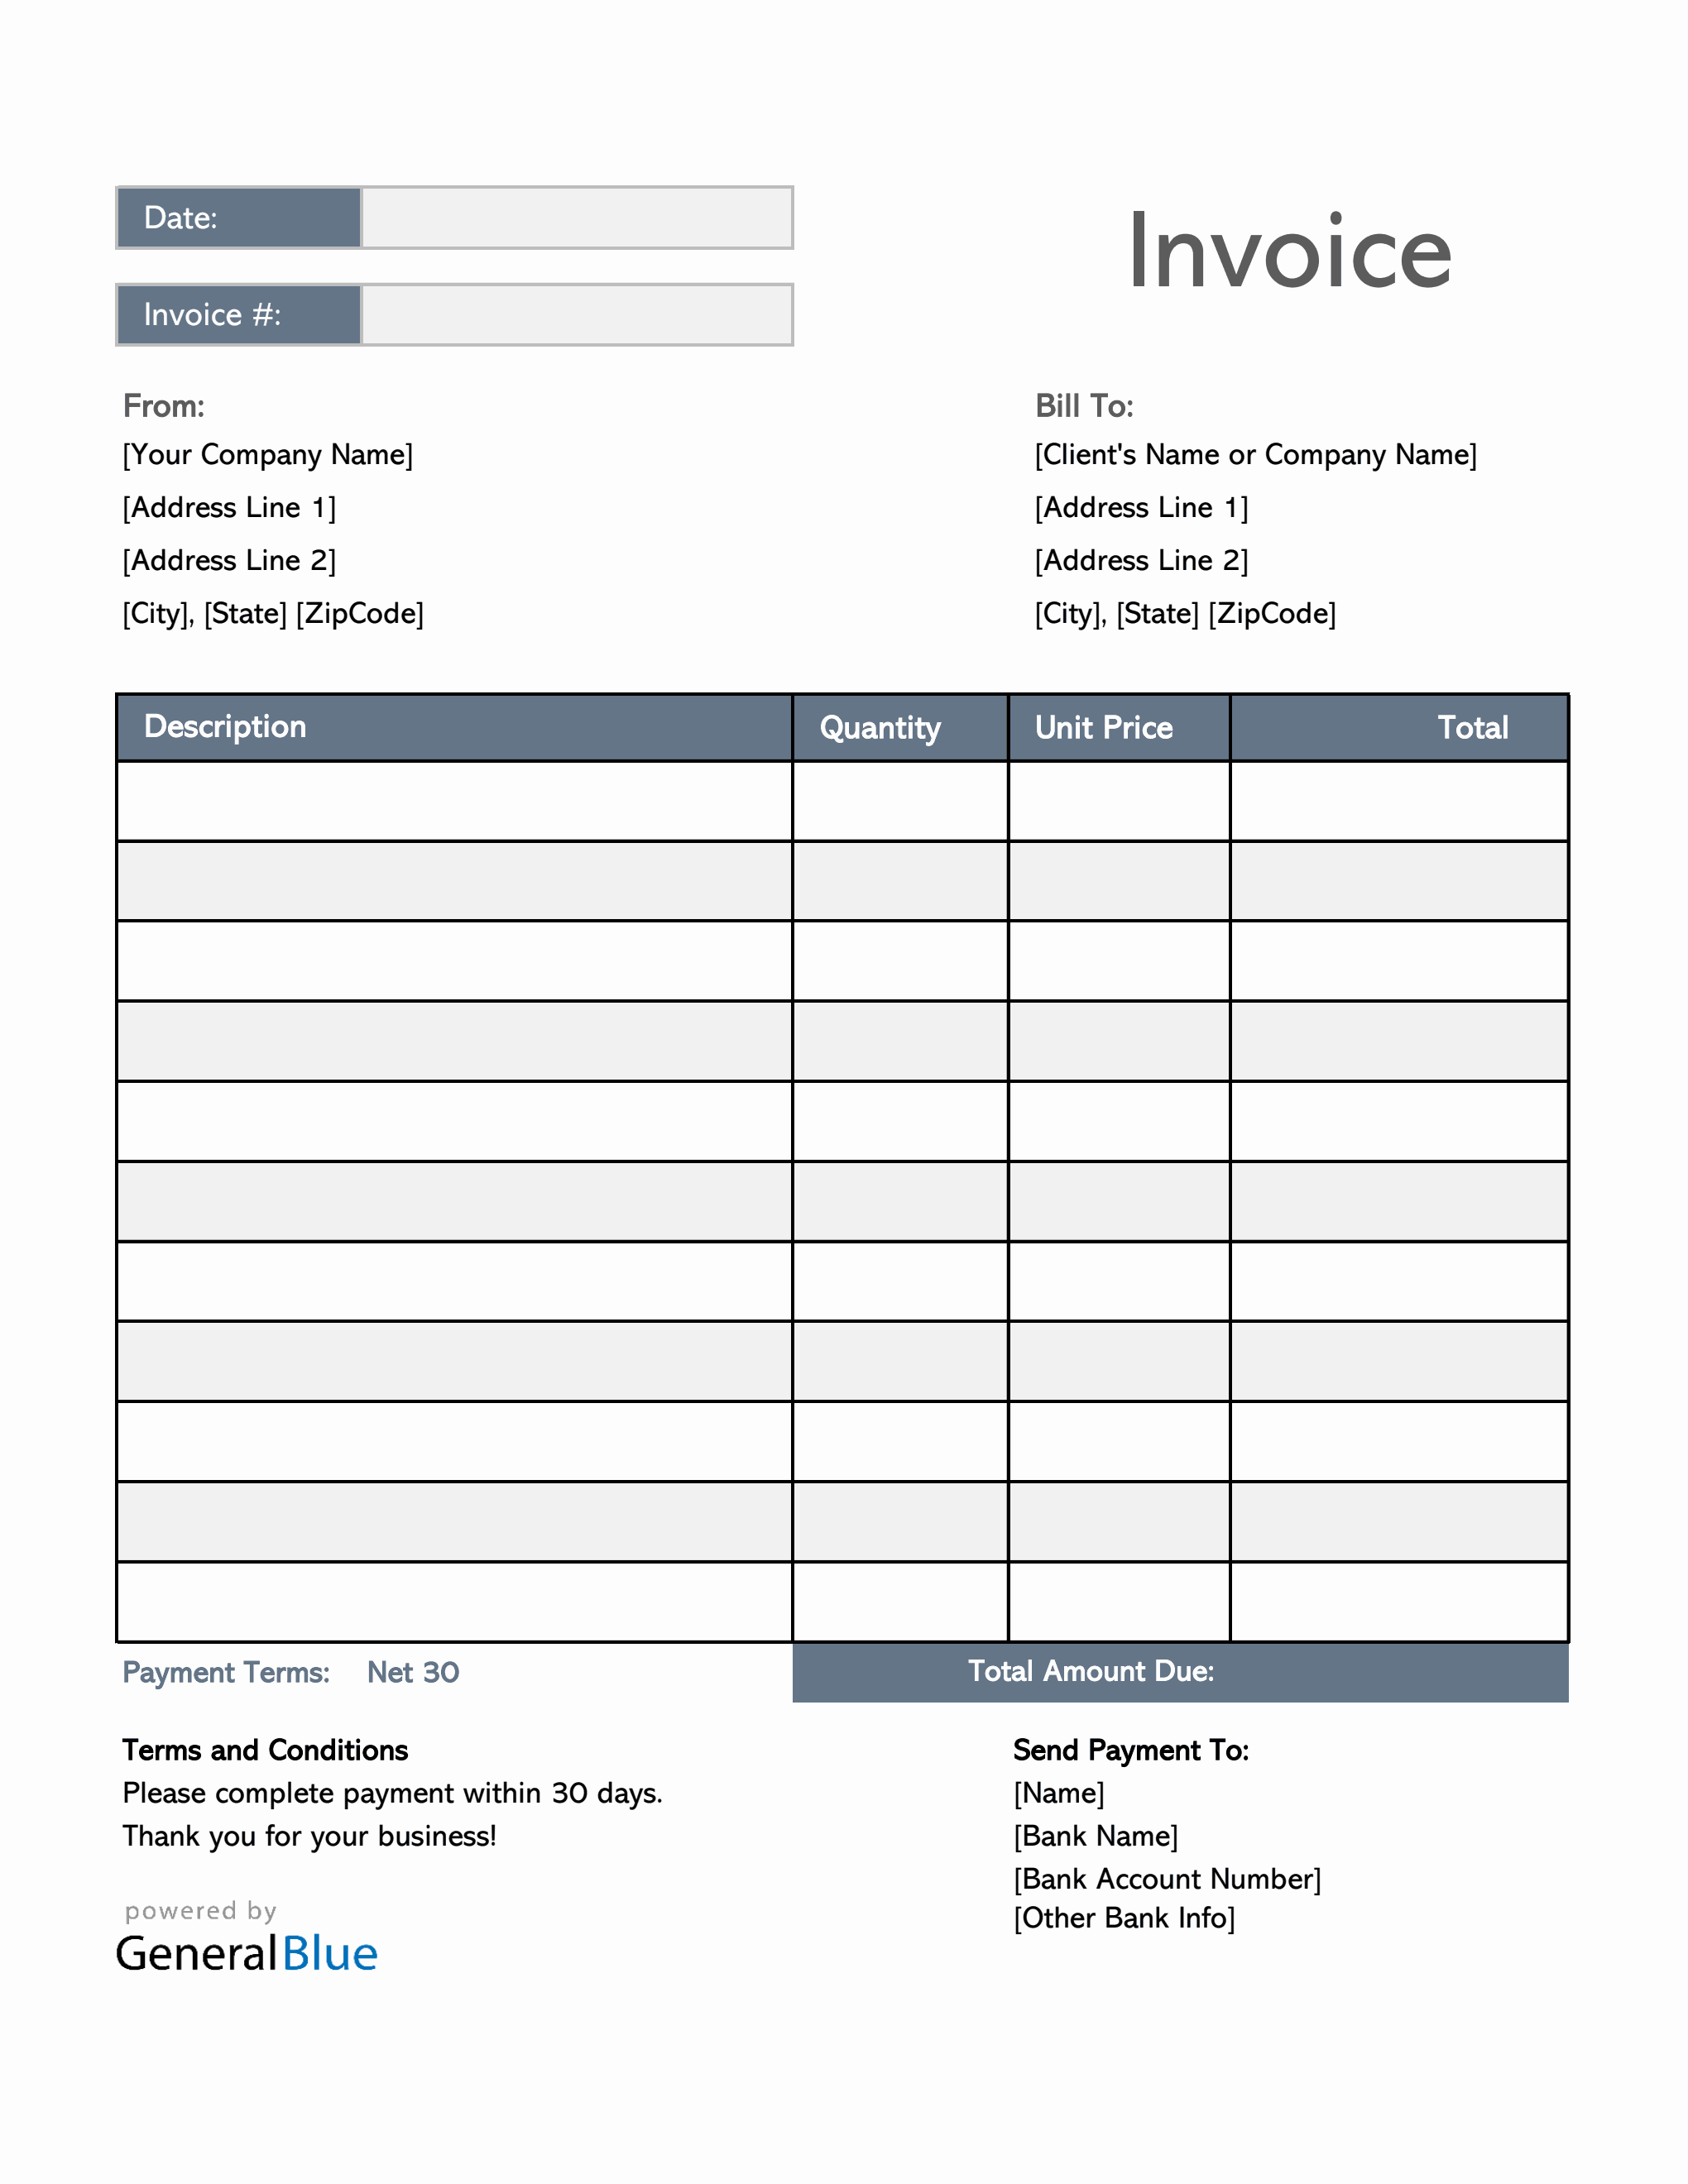 invoice-tracking-template